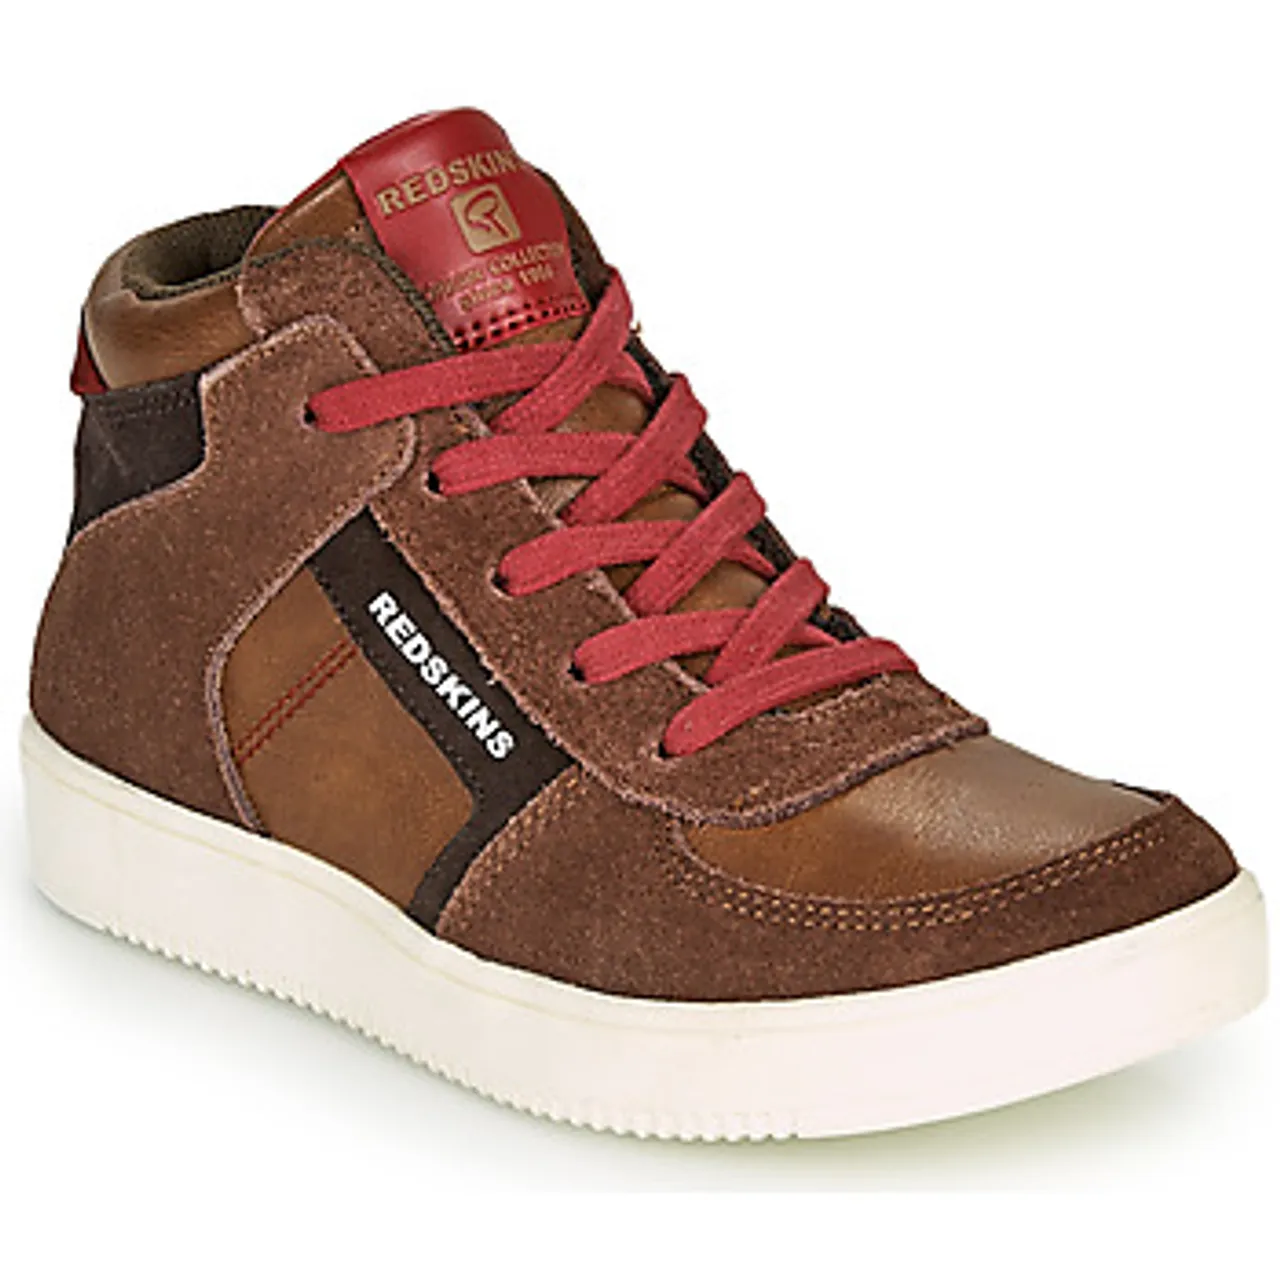 Redskins  LAVAL KID  boys's Children's Shoes (High-top Trainers) in Brown